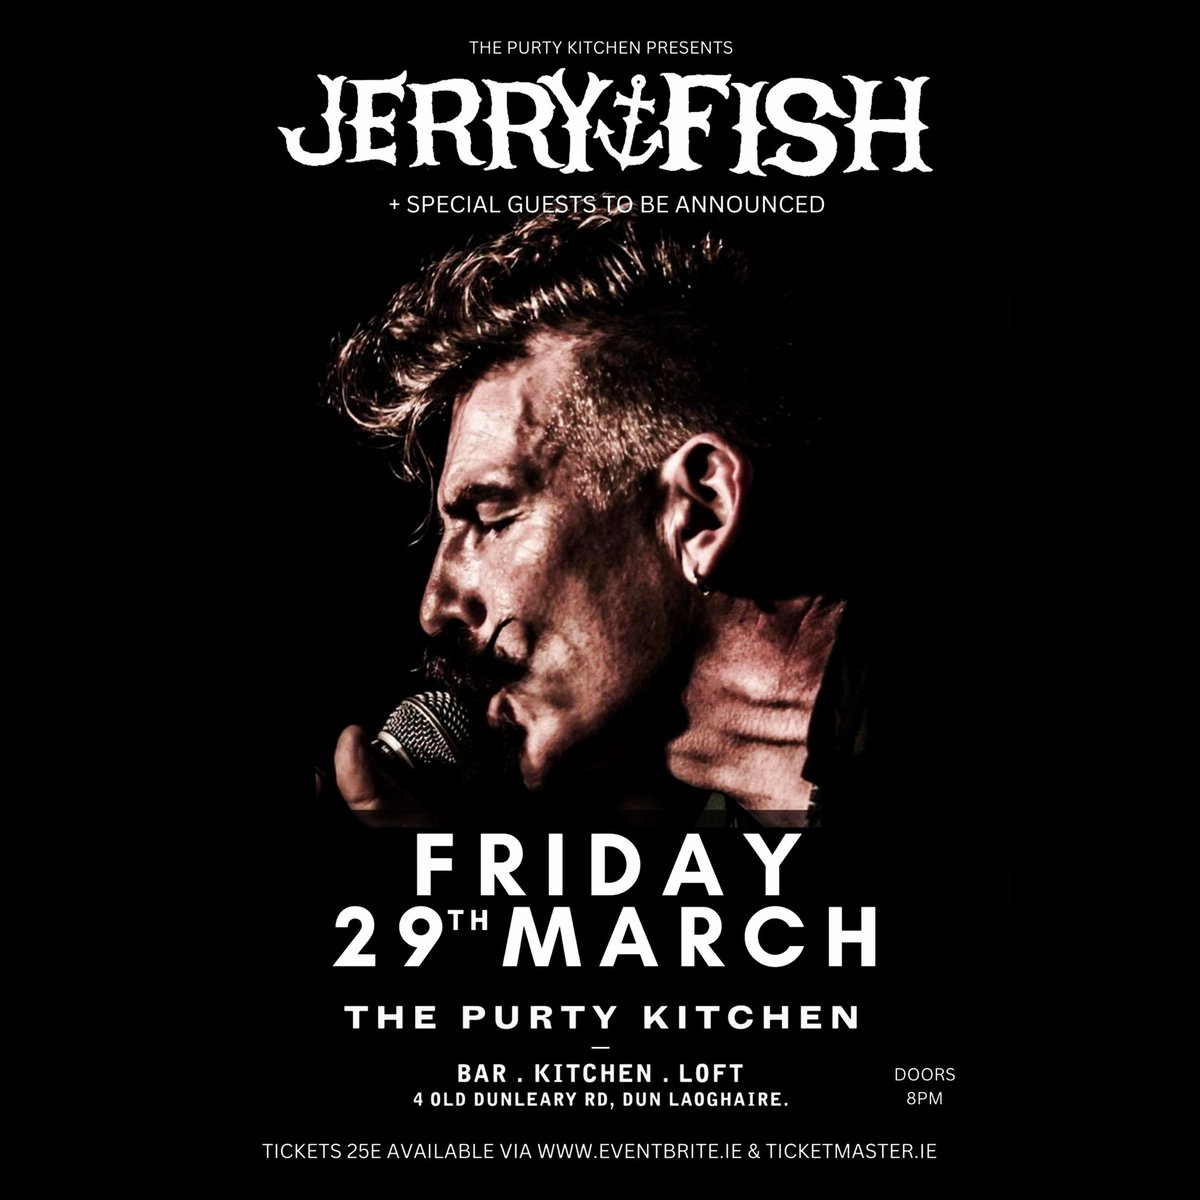 ✨❤️✨ Look forward to returning to the @thepurtykitchen on Friday 29th March! ✨❤️✨ Always such a fun night! 🕺✨💃 Let's Party at the Purty! ✨ Hope to see you there me Darlin's! Big Love, Jerry⚓Fish ❤️☠️⚓xxx